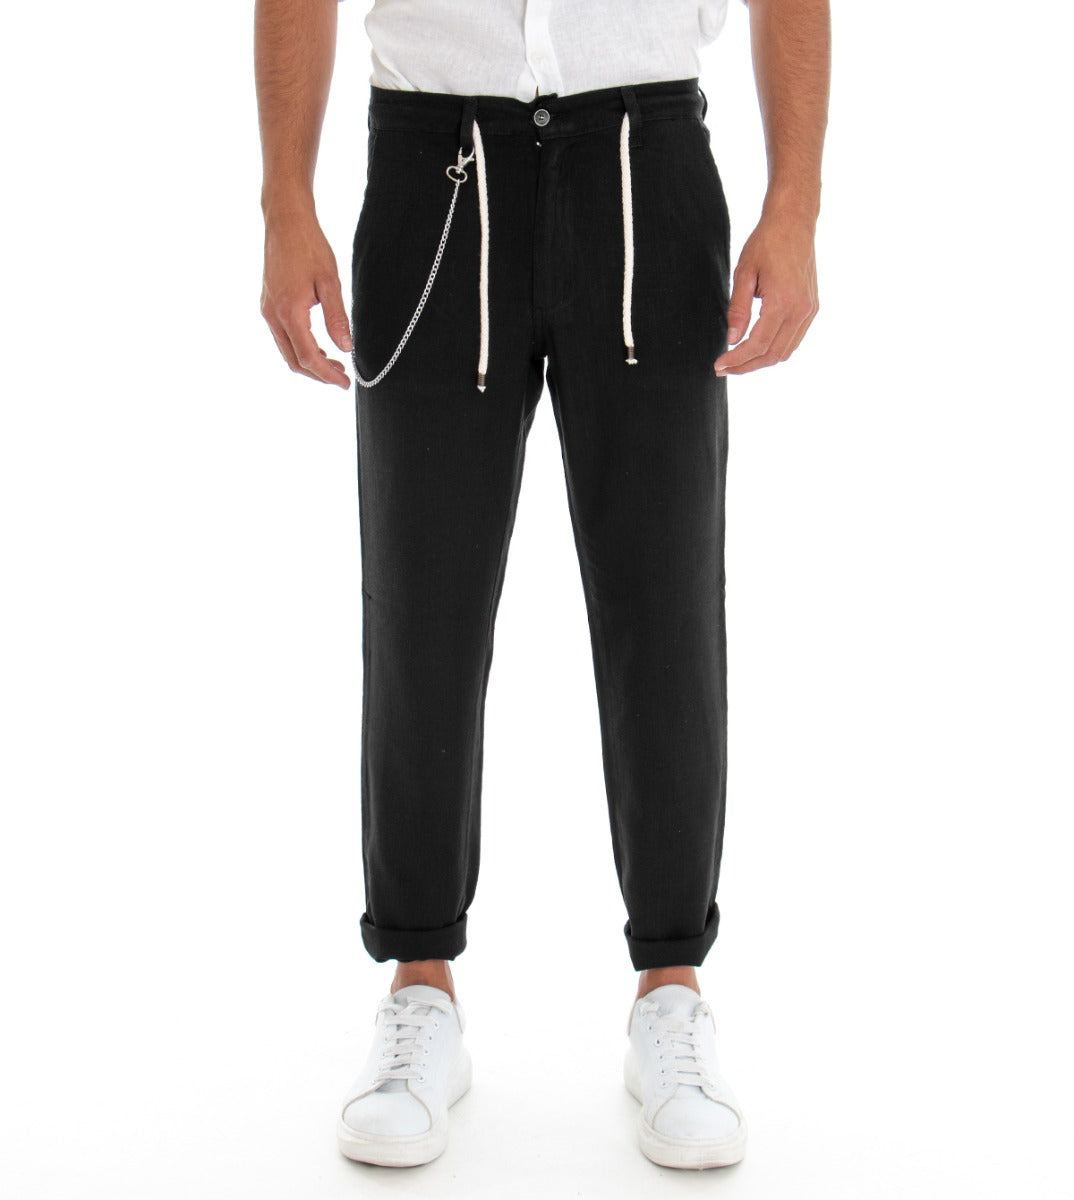 Equipe Men's Trousers Solid Color Black Linen Drawstring GIOSAL